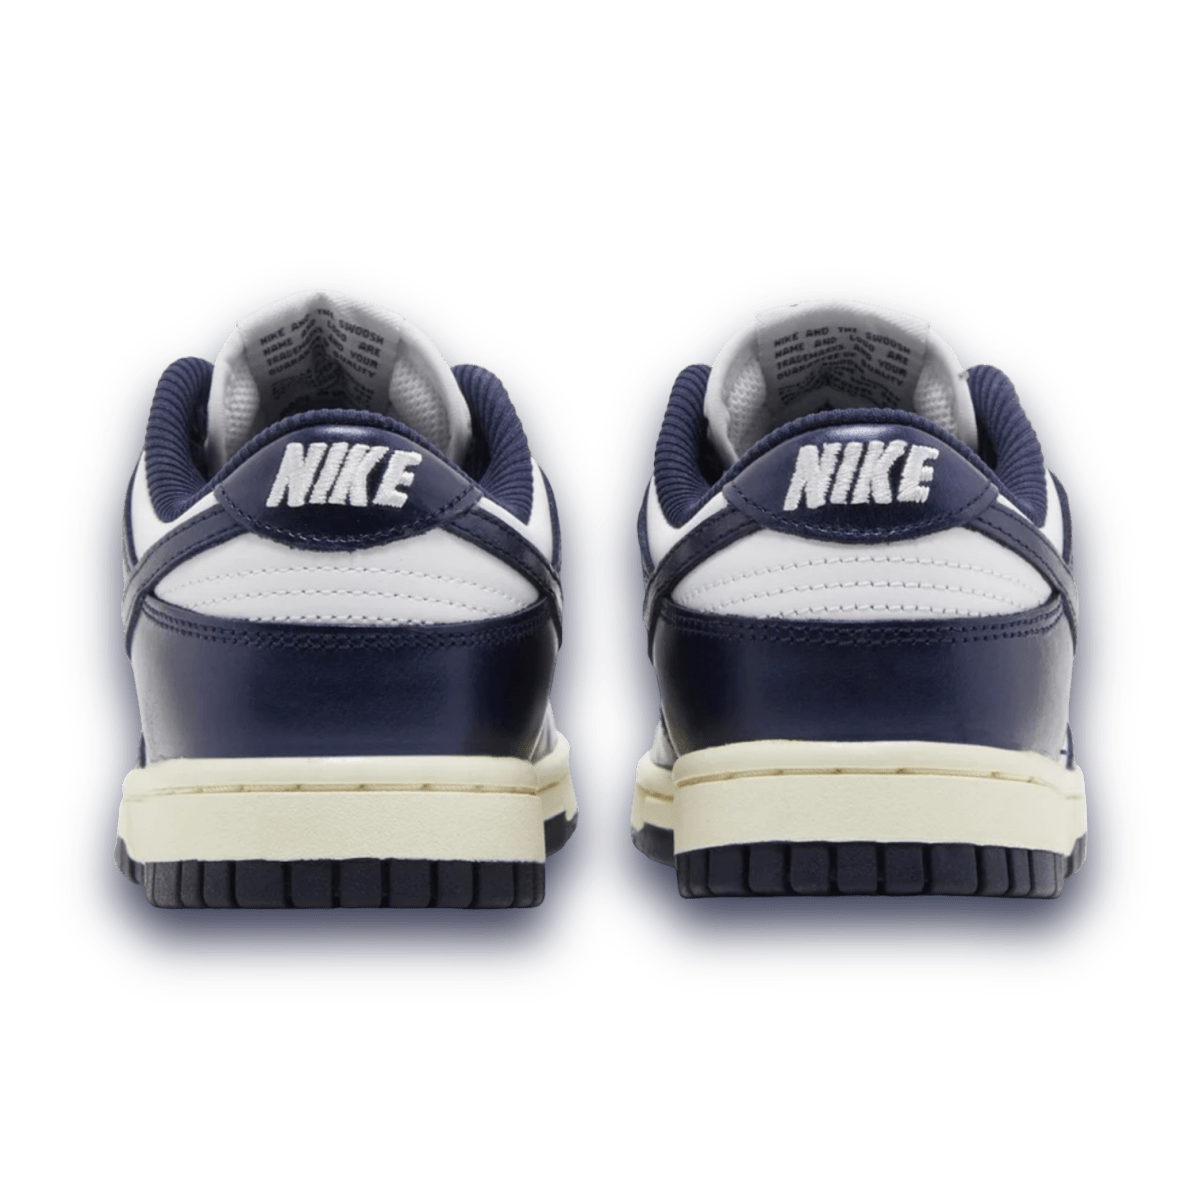 Laces for Lions Dunk Low 'Vintage Navy' - Low Sneaker - Jawns on Fire Sneakers & Streetwear